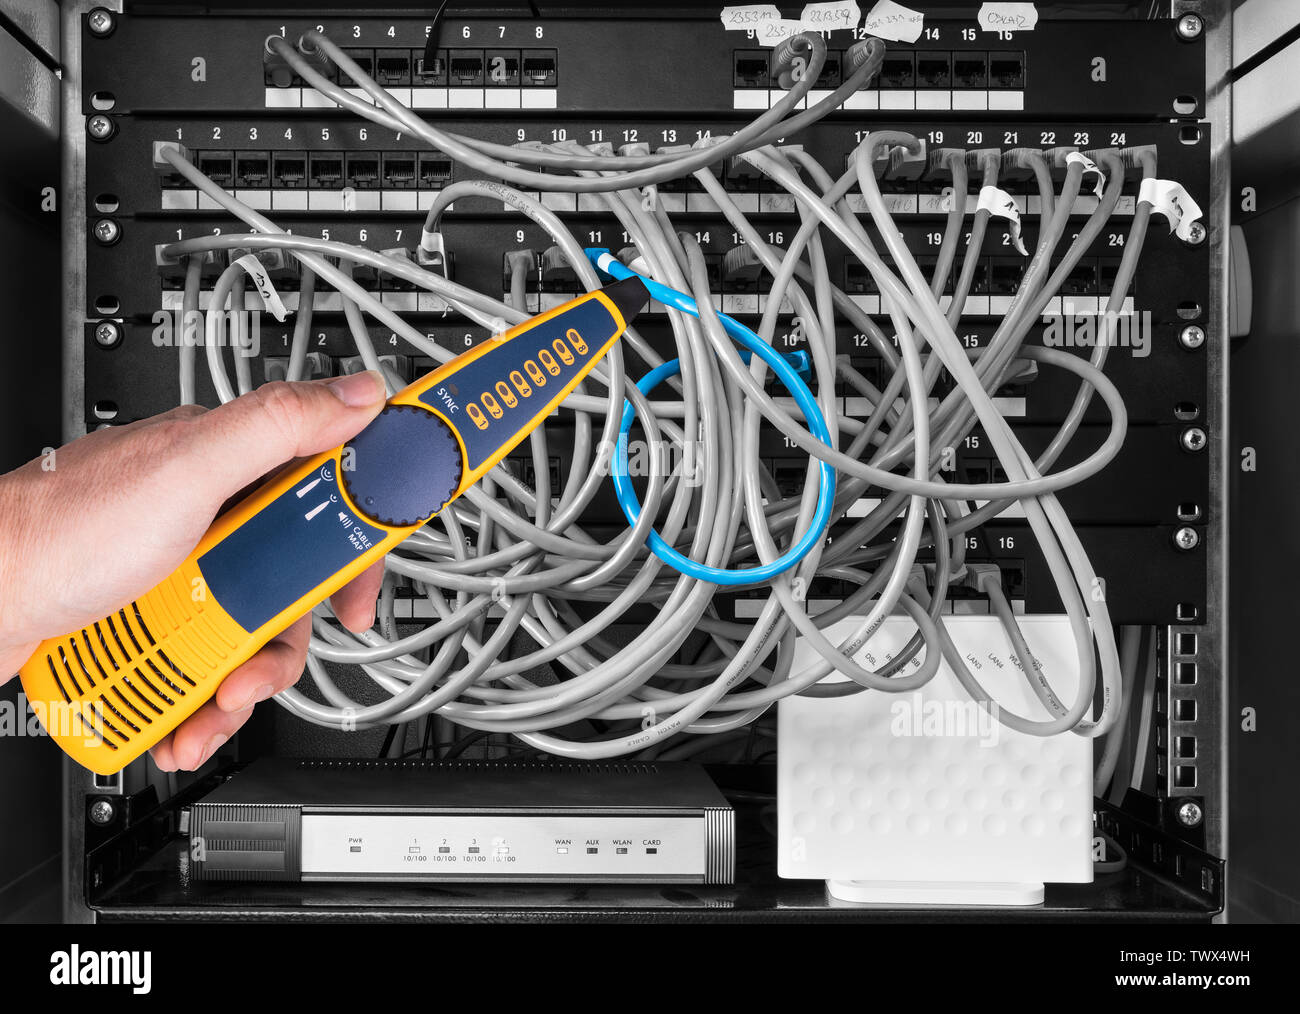 Network cable tester detail. Measuring probe in hand of expert. Diagnostic measurement of structured cabling in patch panels of rack case. IT service. Stock Photo